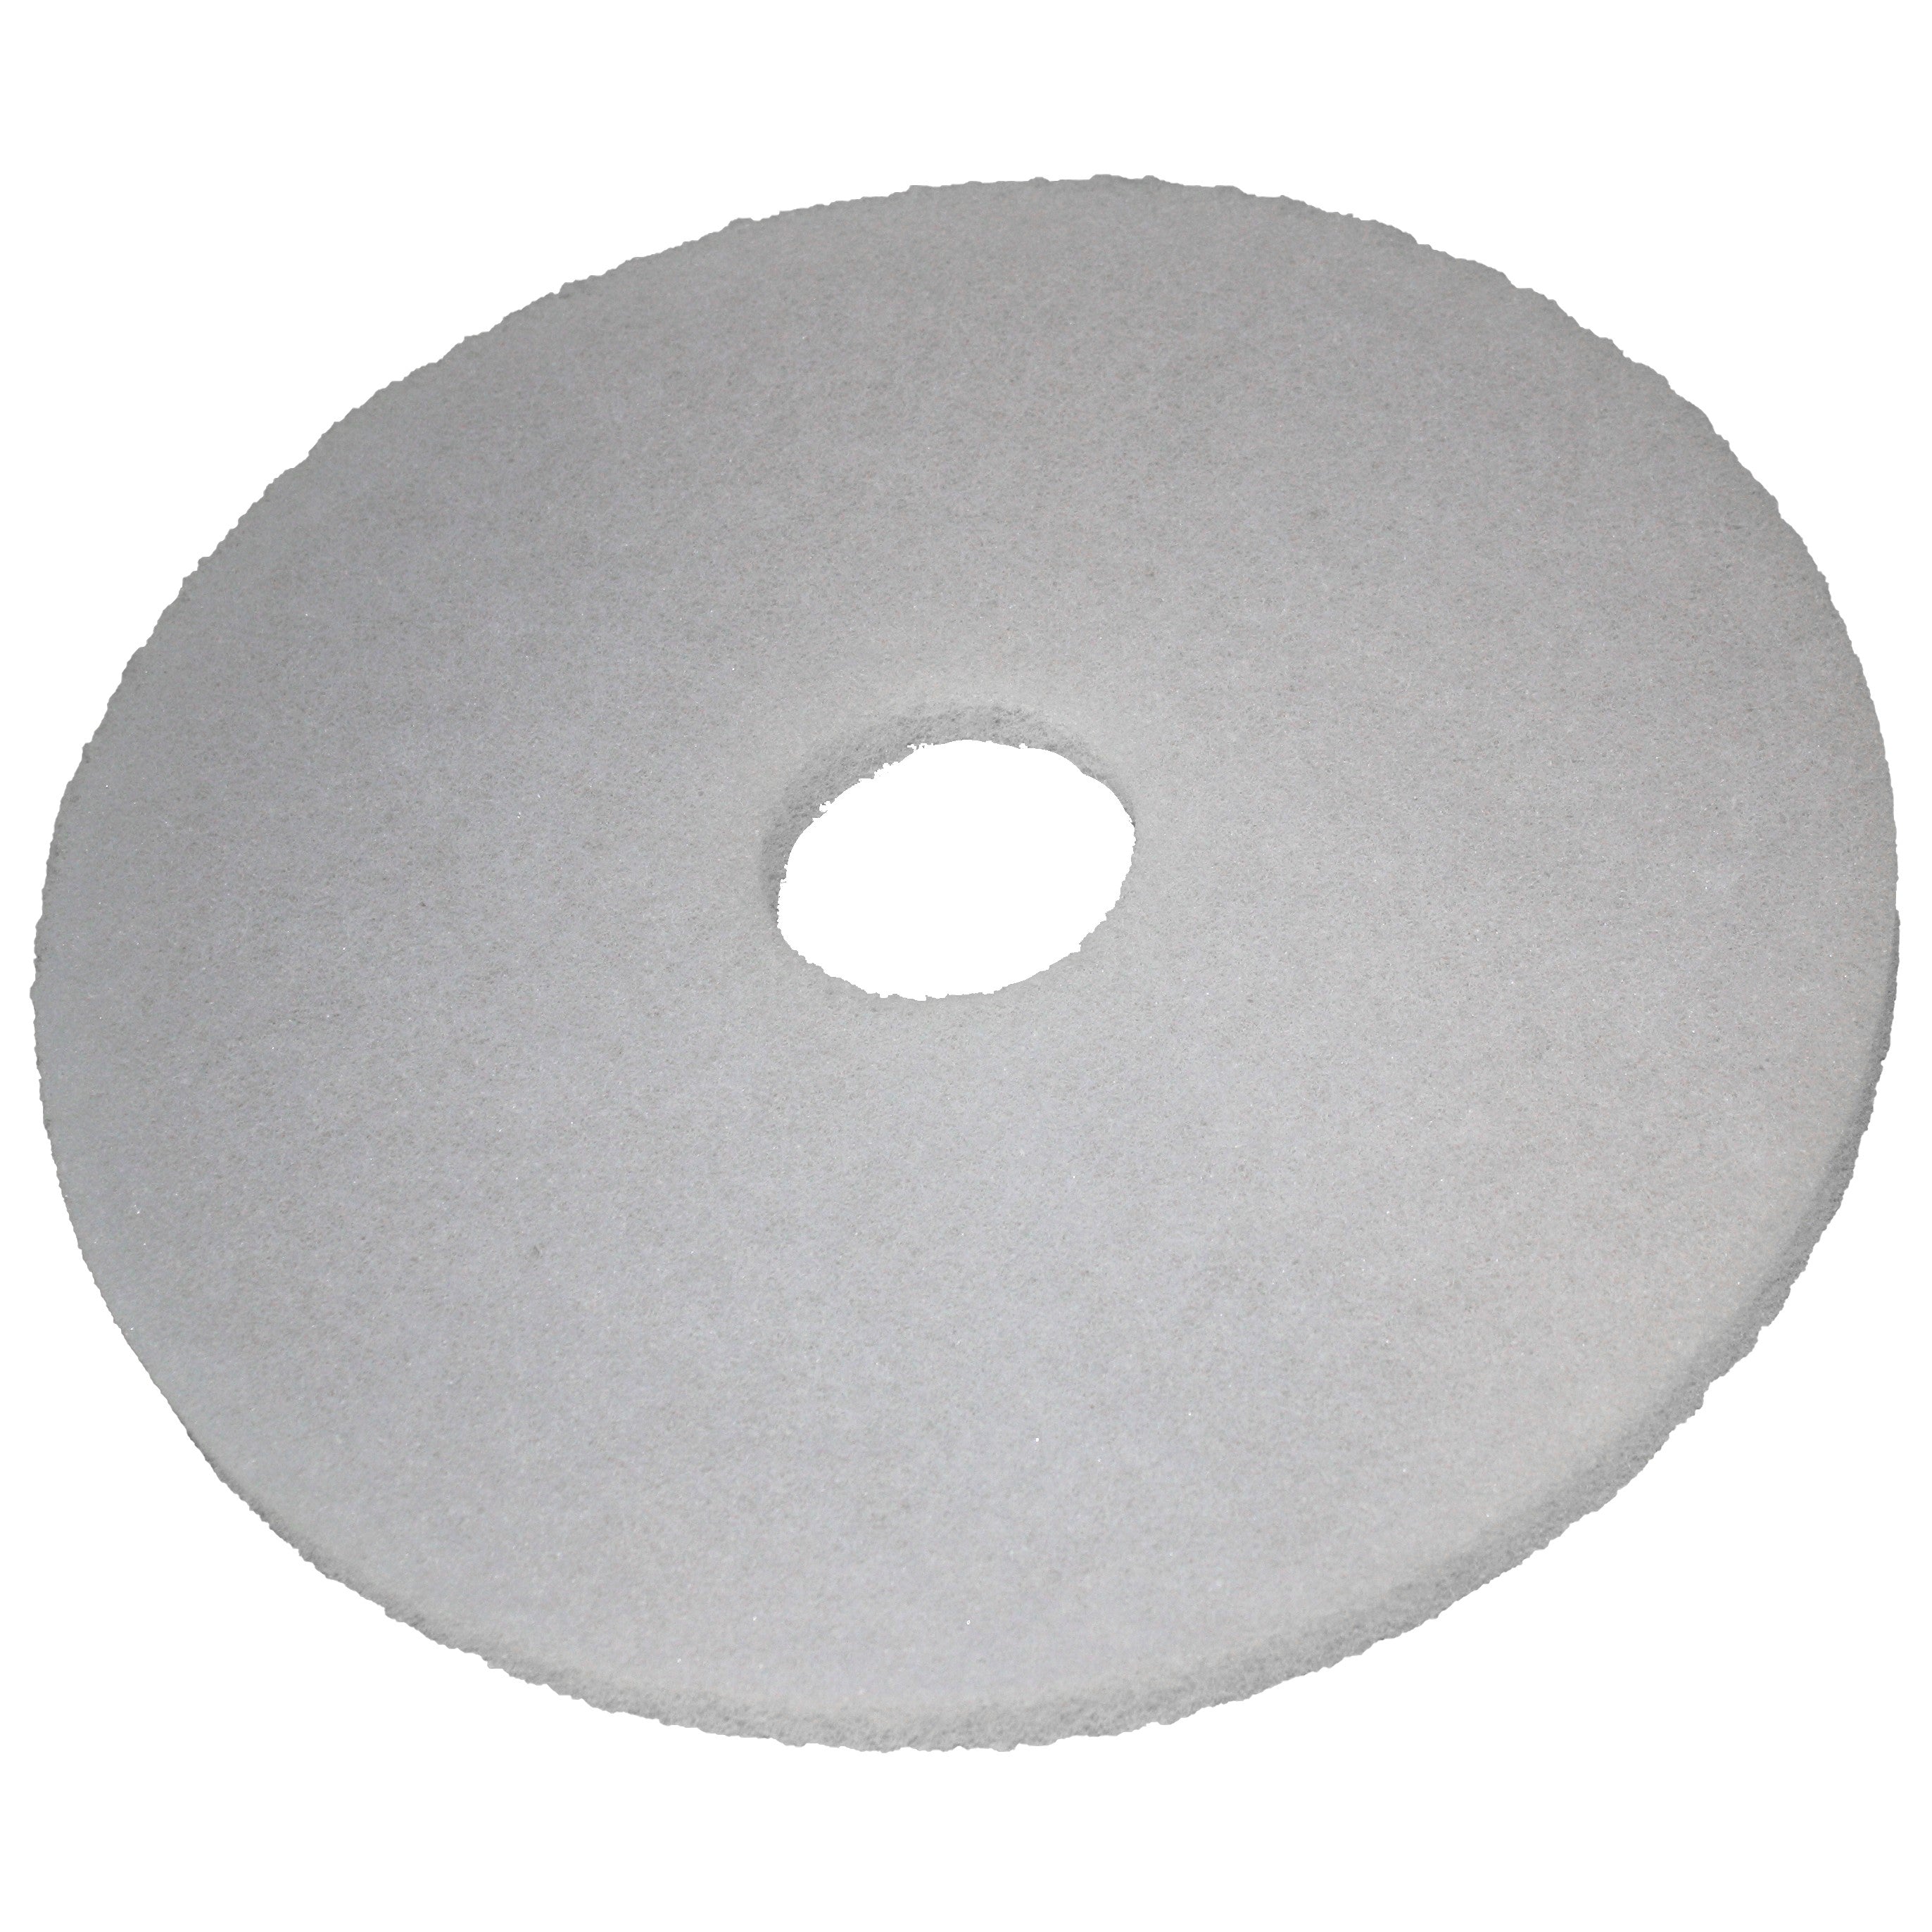 Pad weiss, Ø 508 mm, Polyester